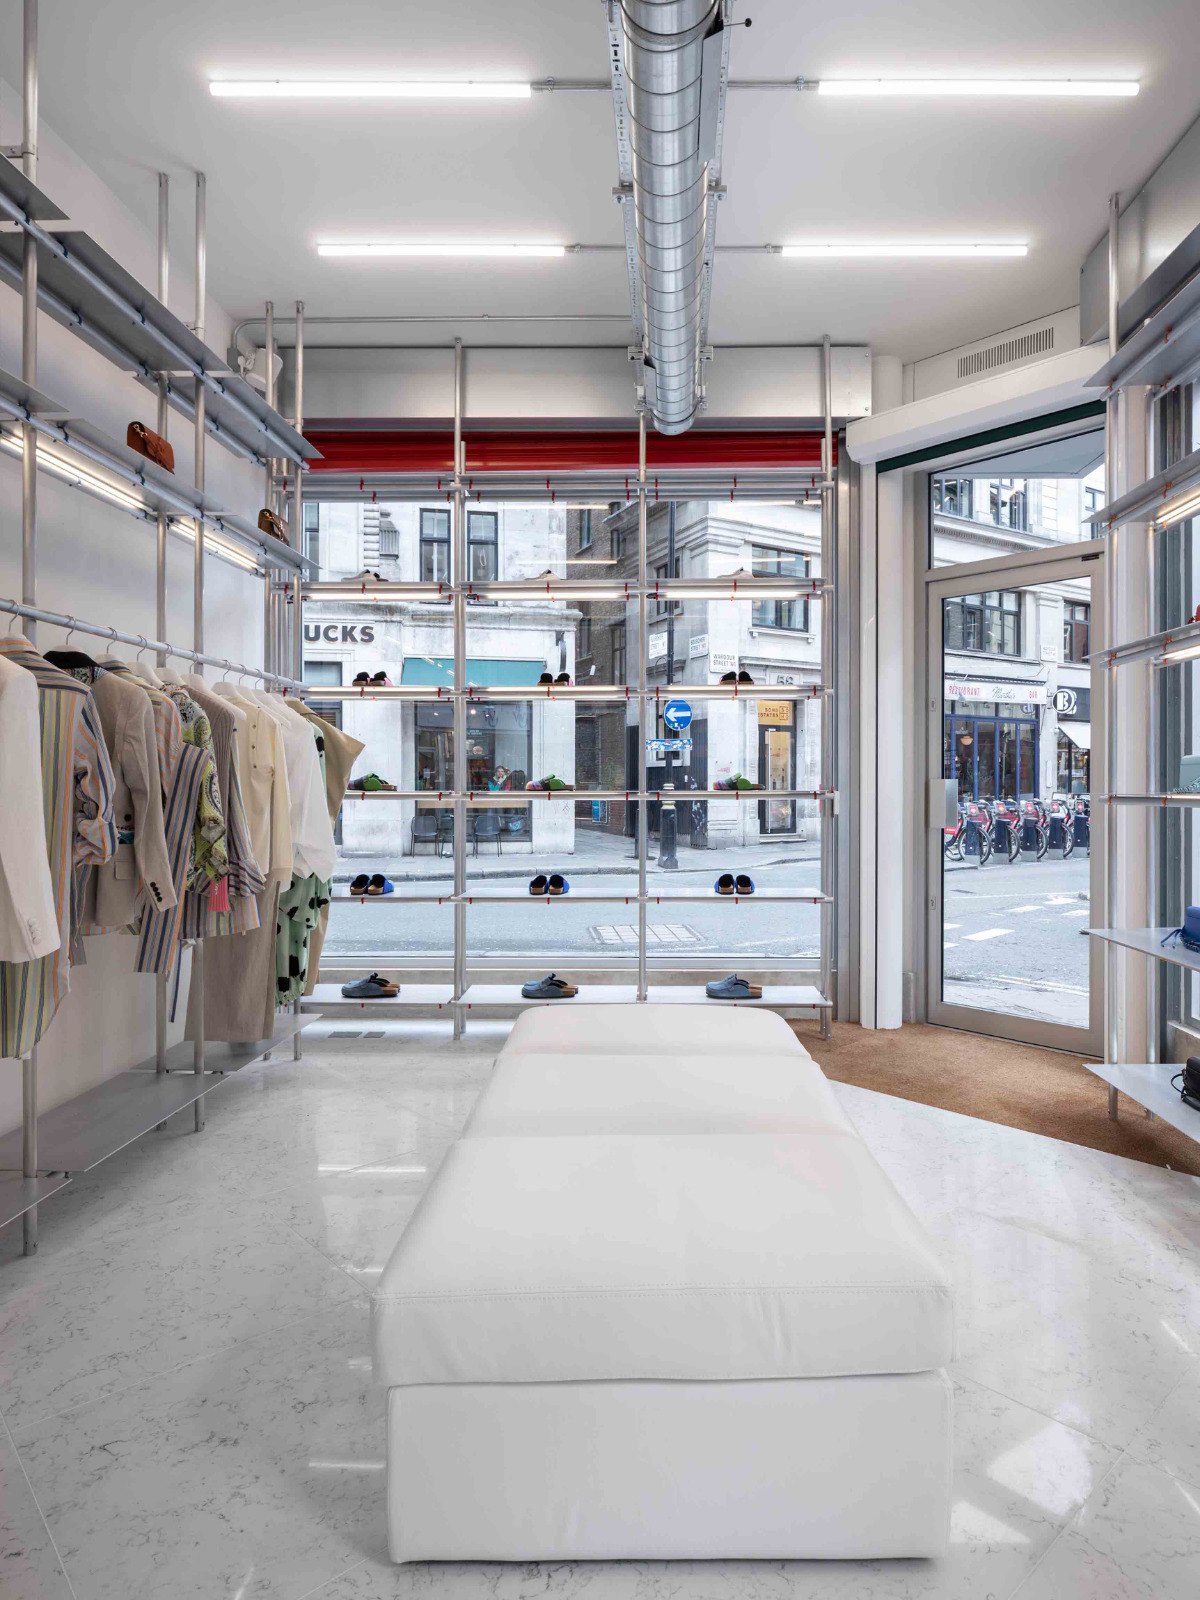 JW Anderson's new flagship store in Soho, London